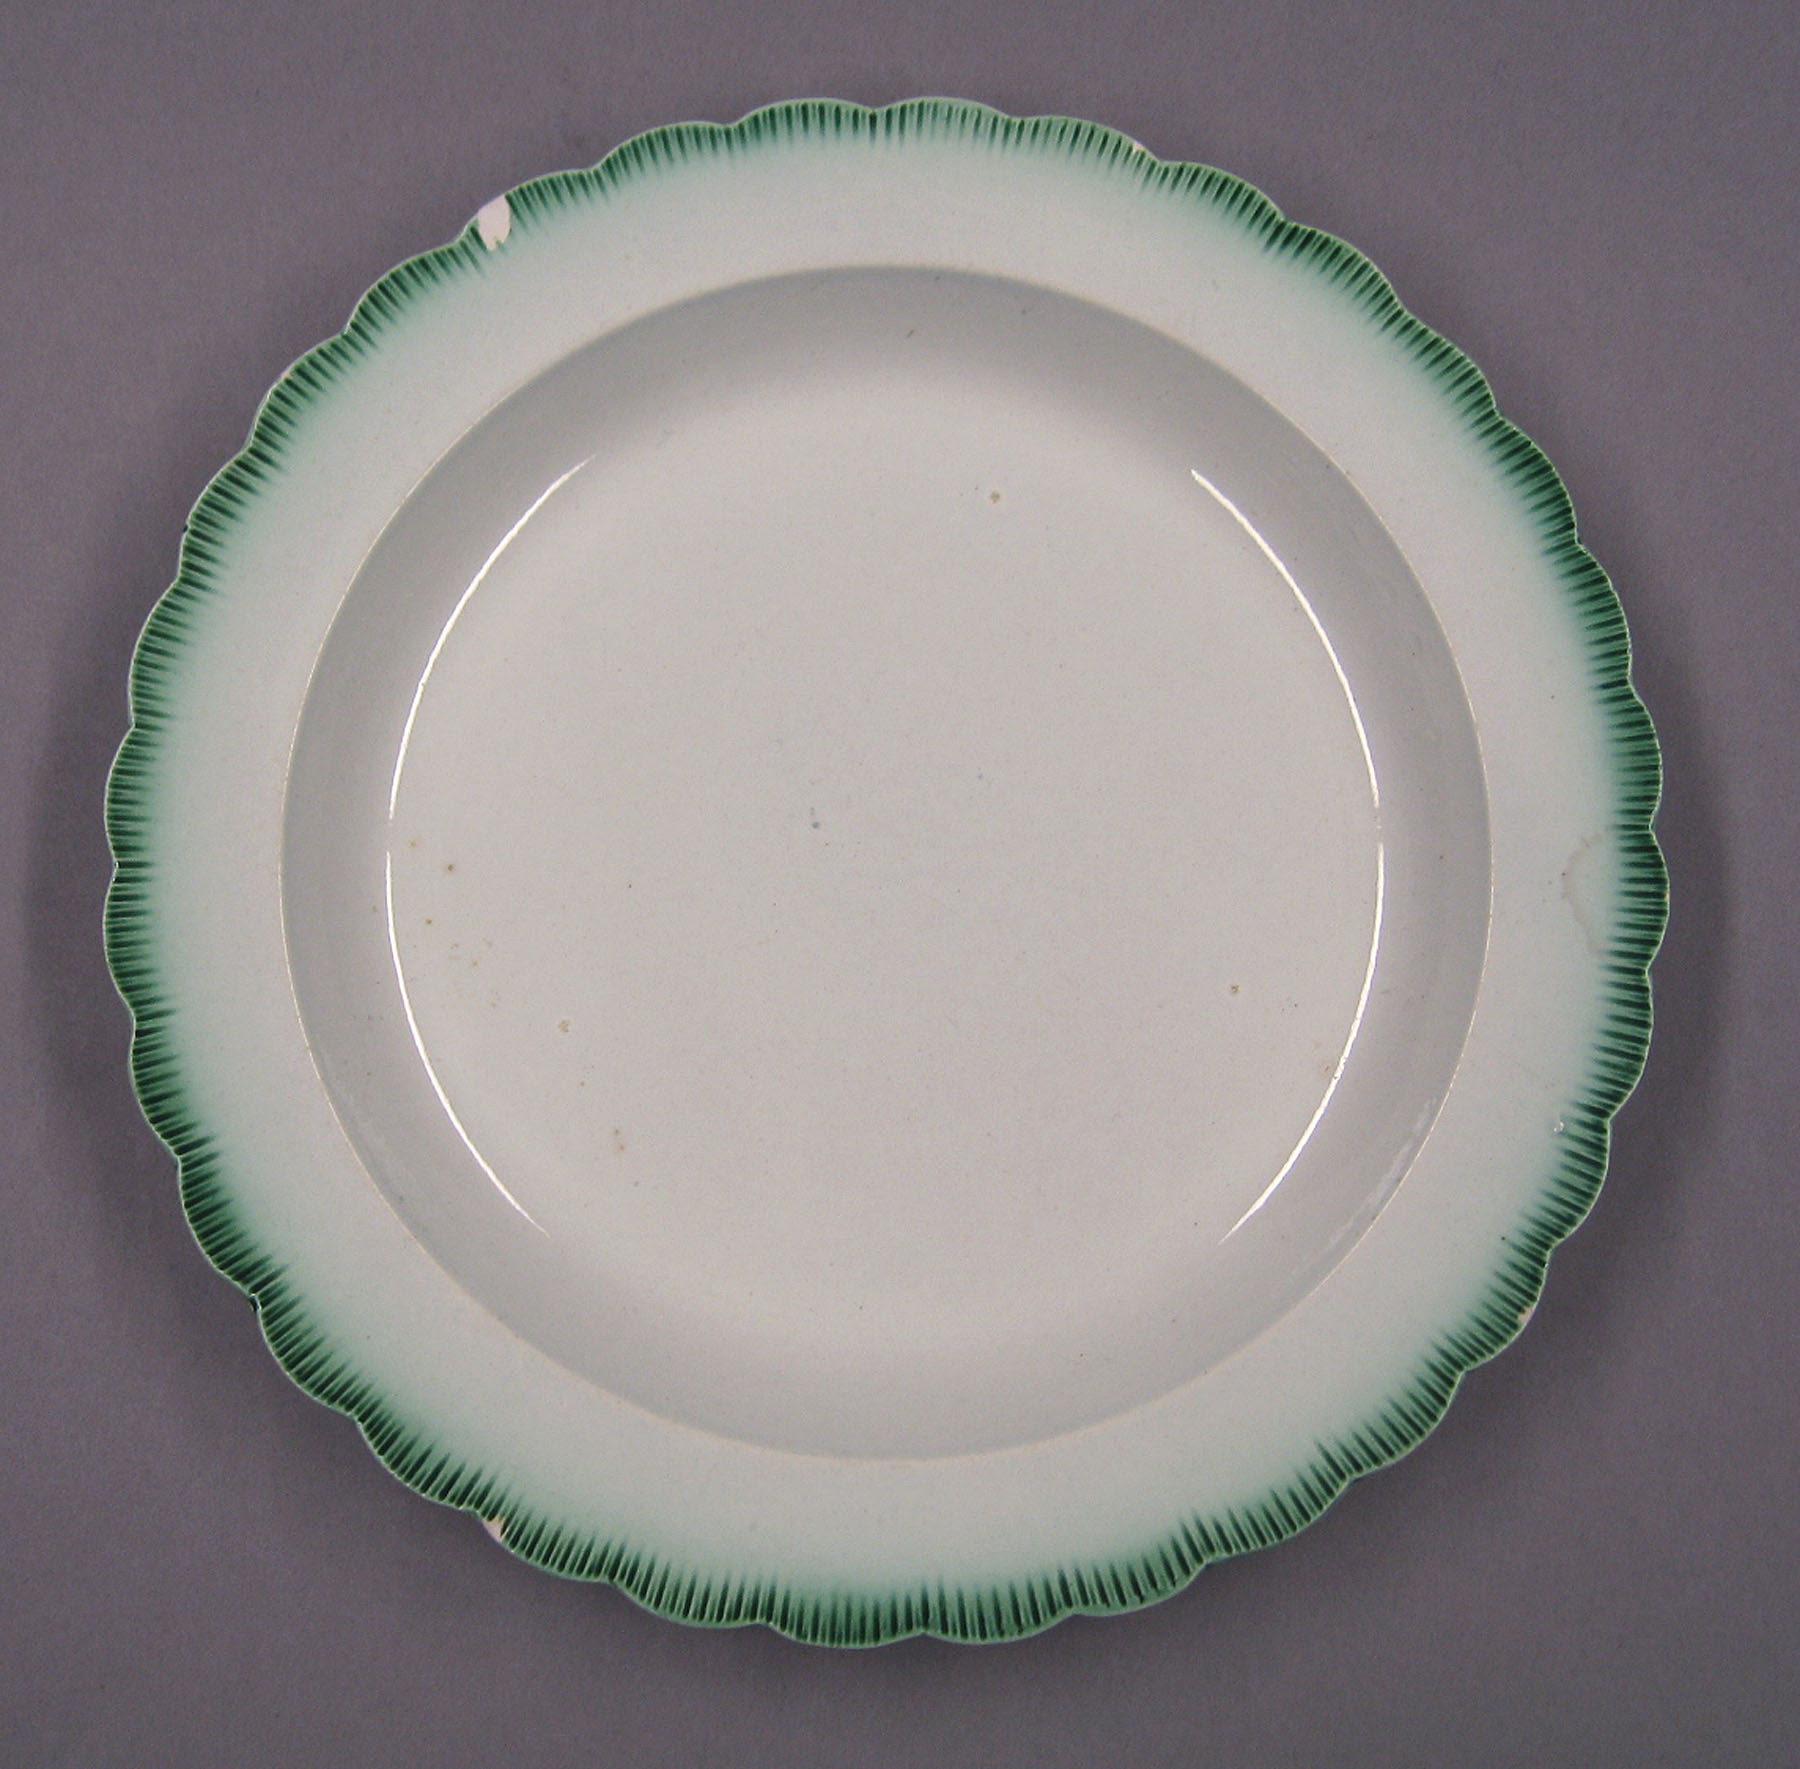 1969.0867.005 Sewell Pearlware Plate